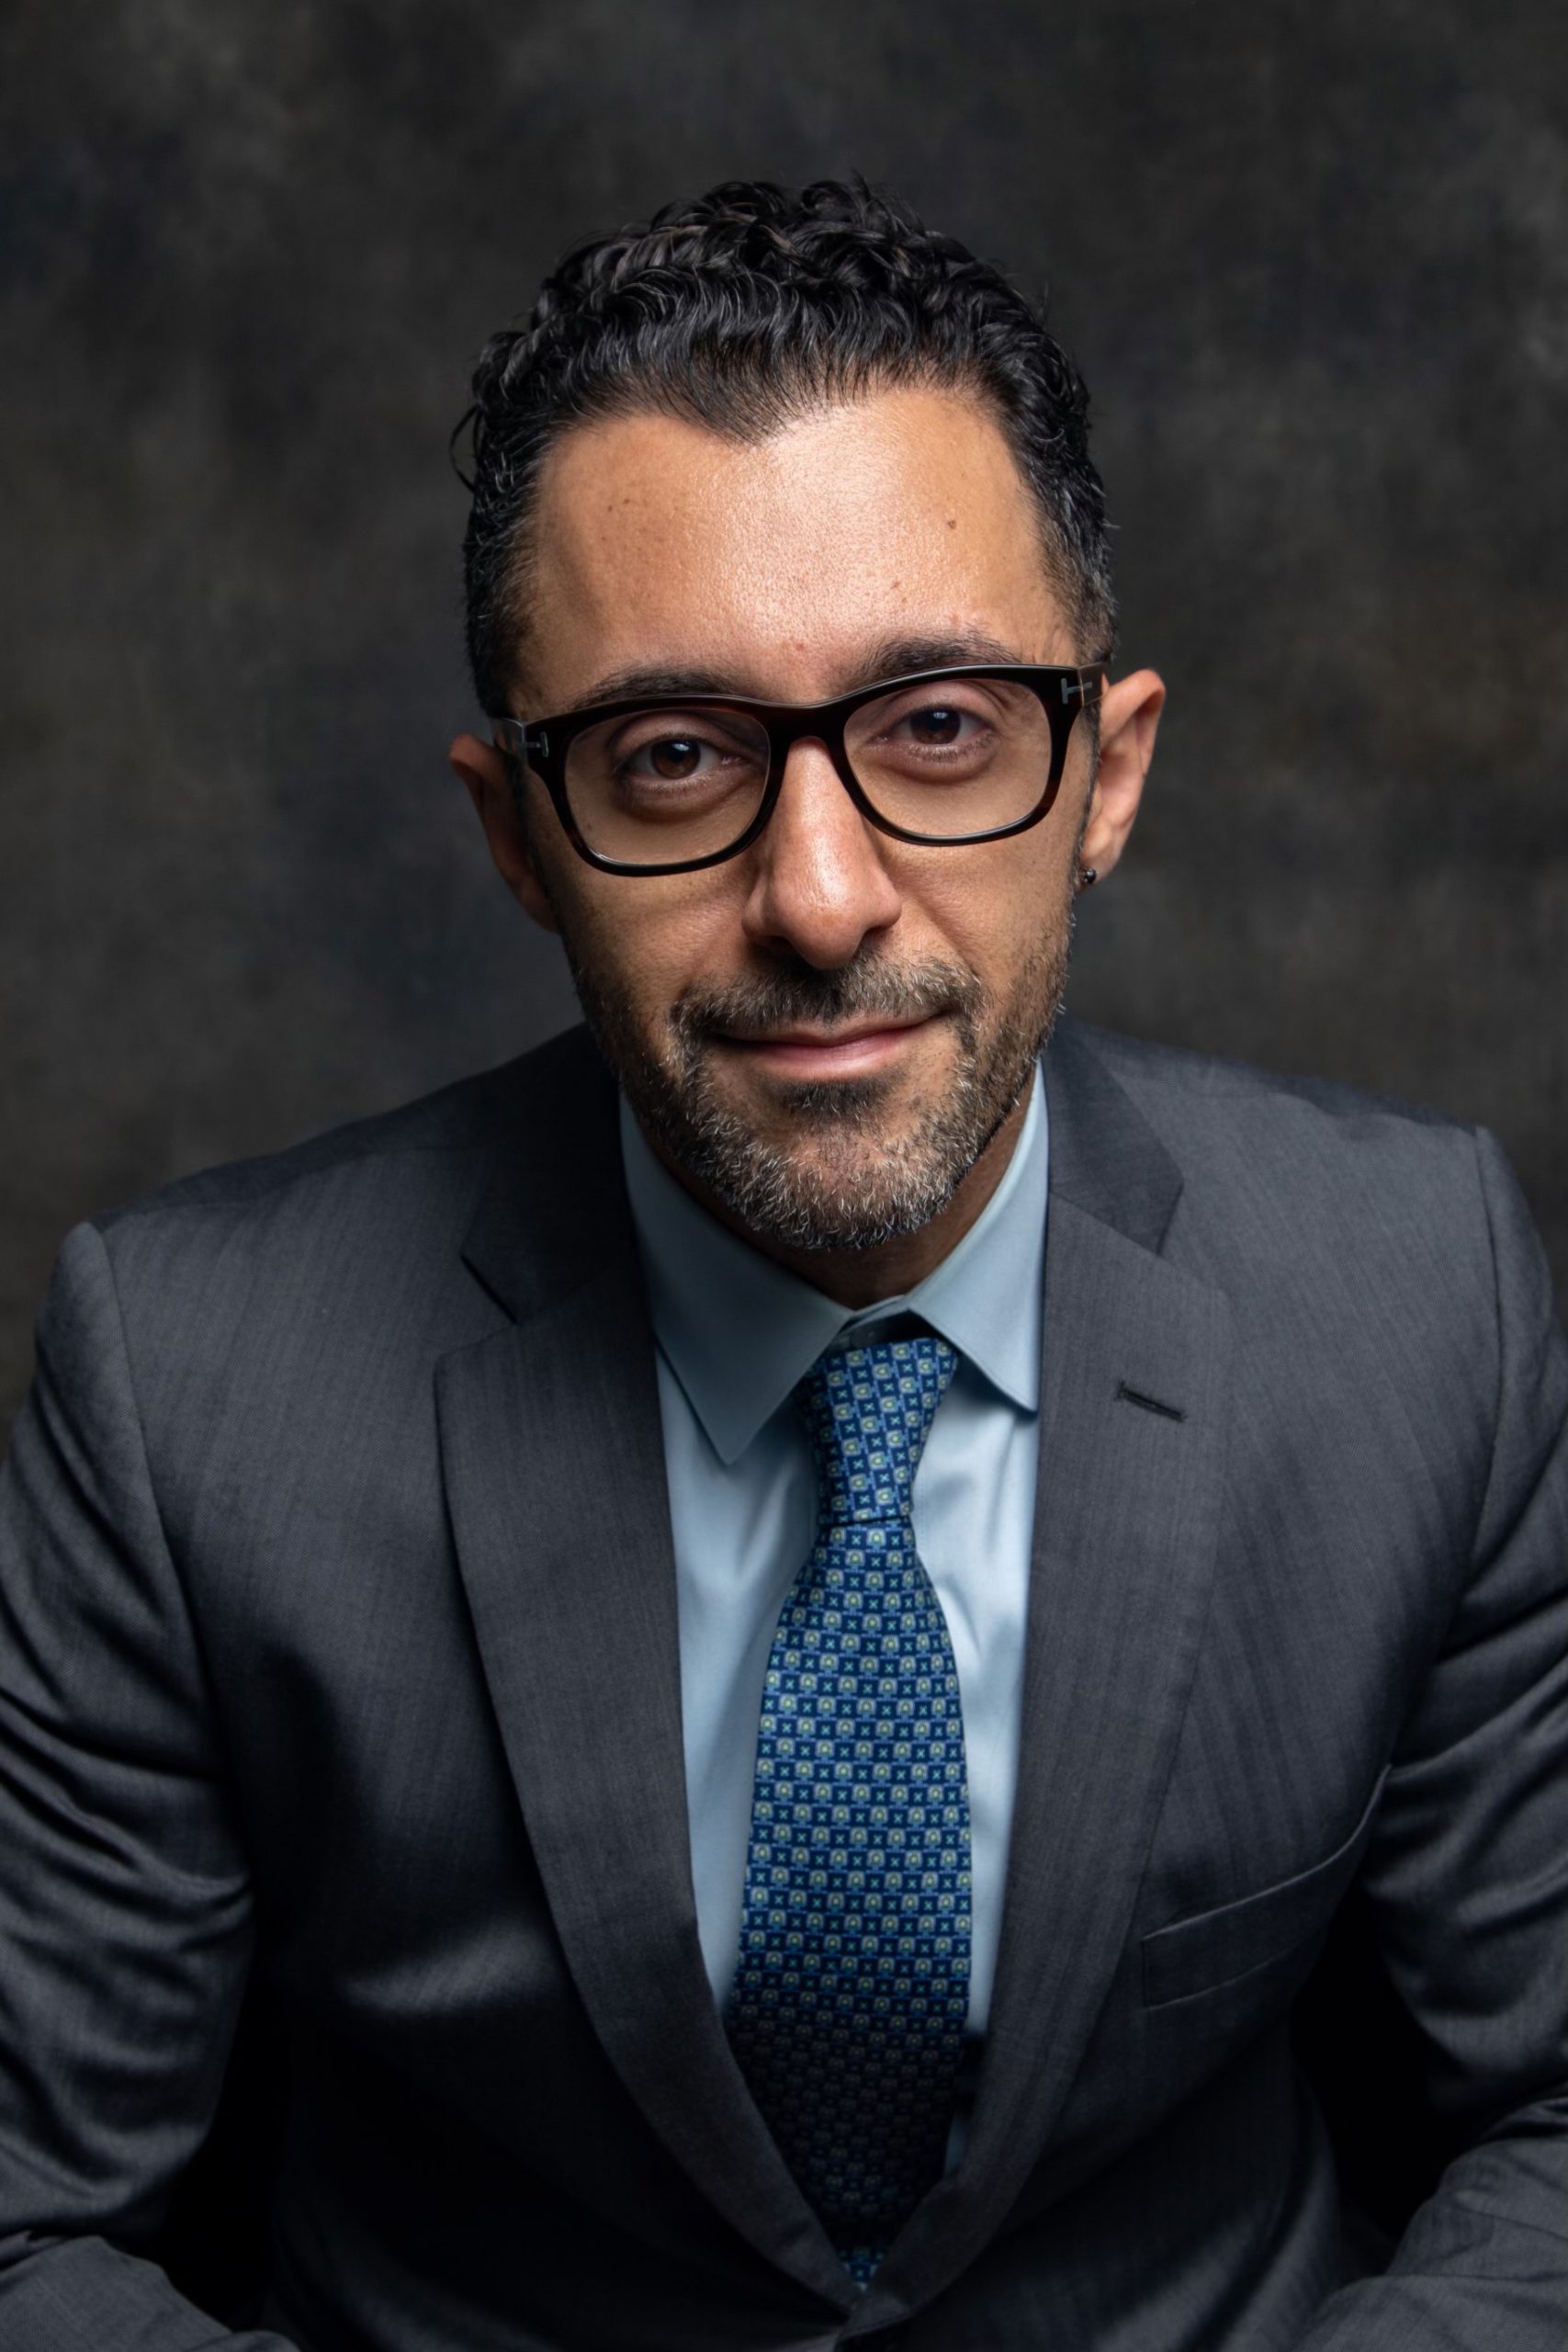 Image of Mark Issa at the Issa Castro Law Firm.